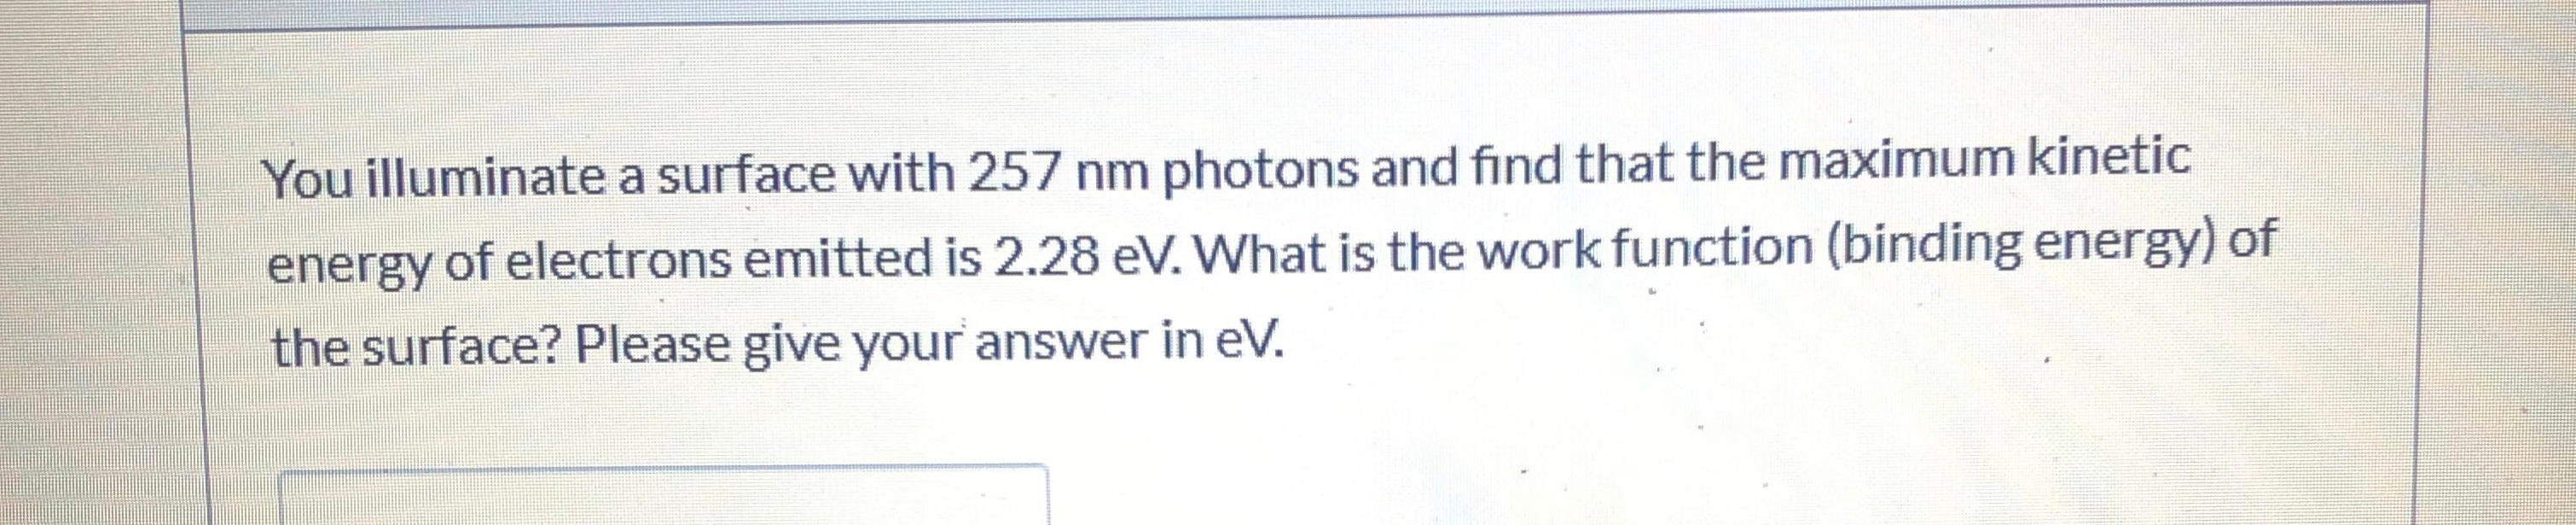 You illuminate a surface with 257 nm photons and find that the maximum kinetic
energy of electrons emitted is 2.28 eV. What is the work function (binding energy) of
the surface? Please give your answer in eV.
